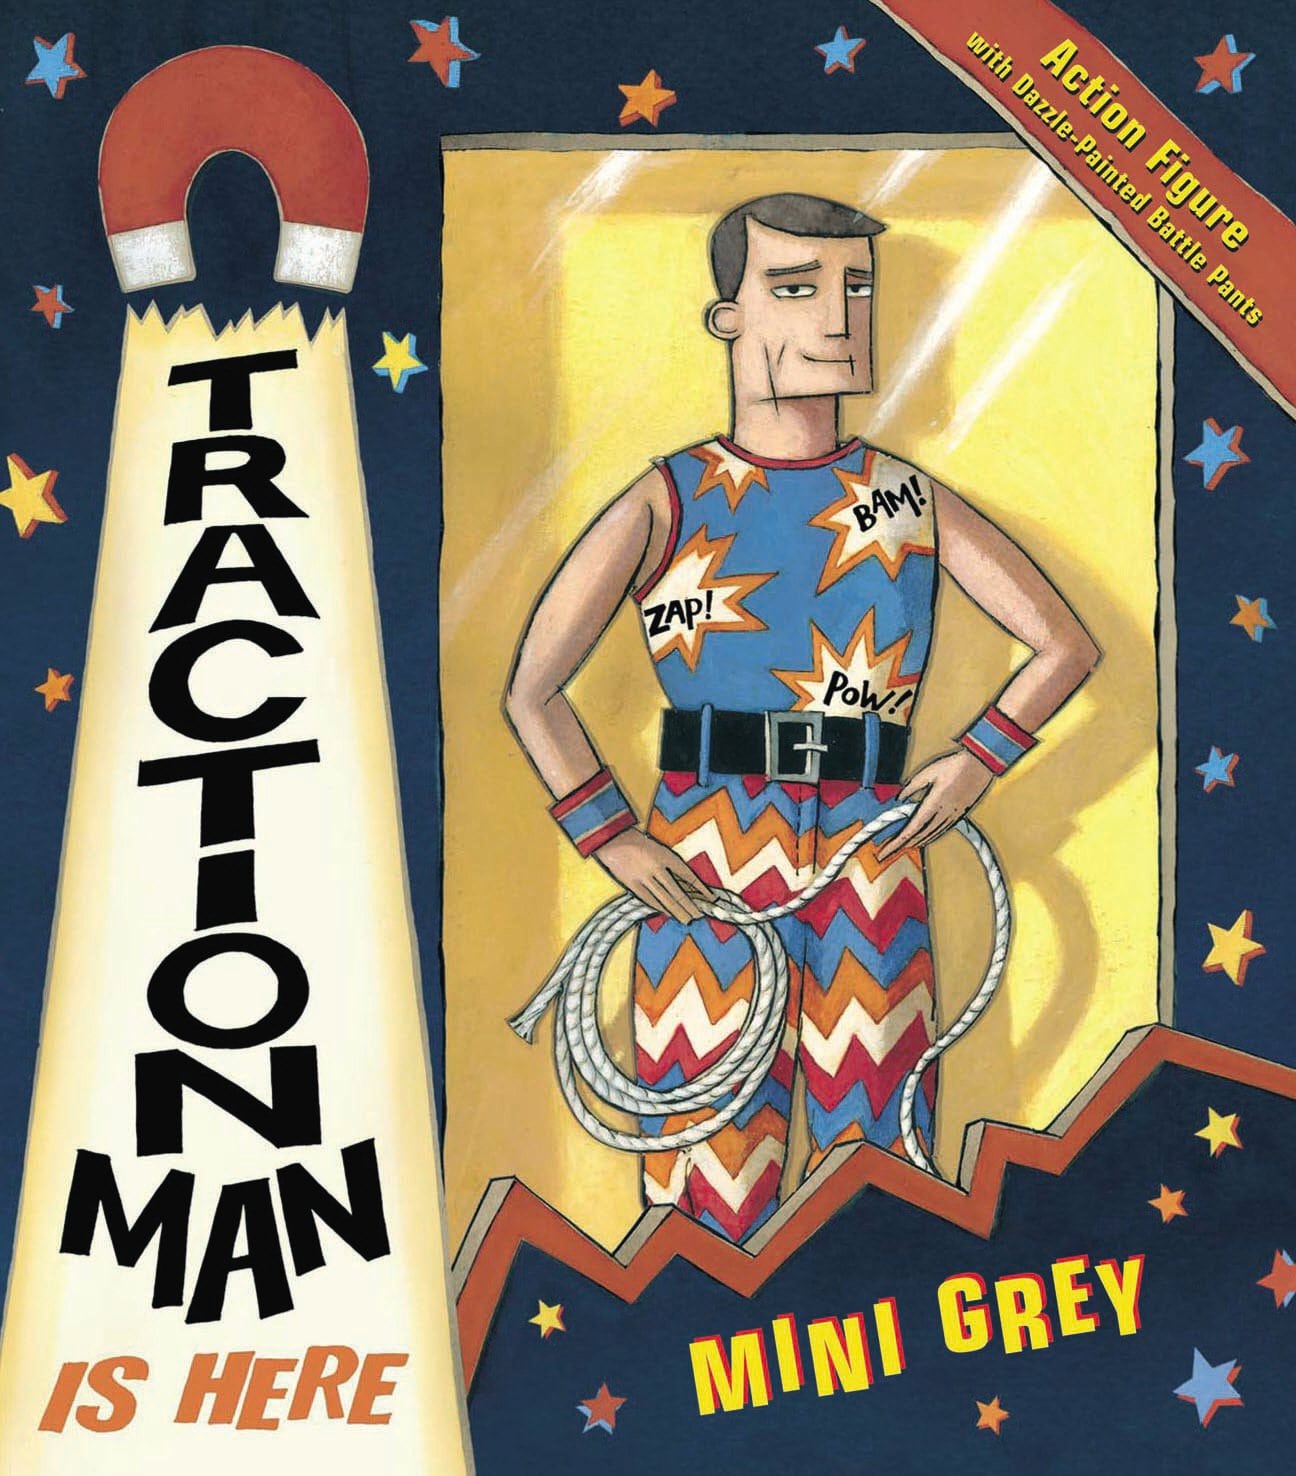 IMG : Traction Man is Here